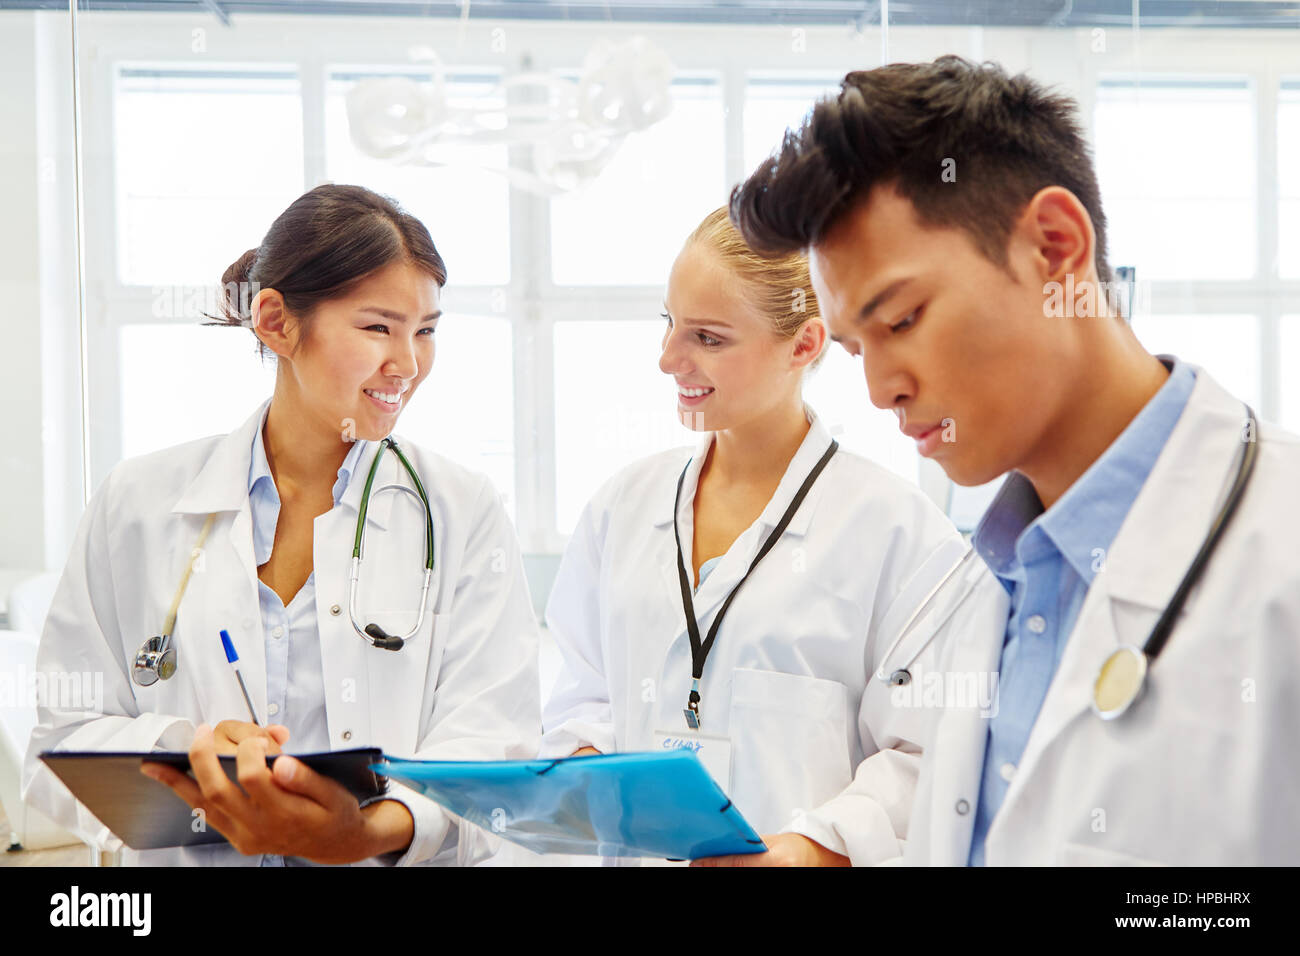 Medical school students in apprenticeship learning together in workshop Stock Photo